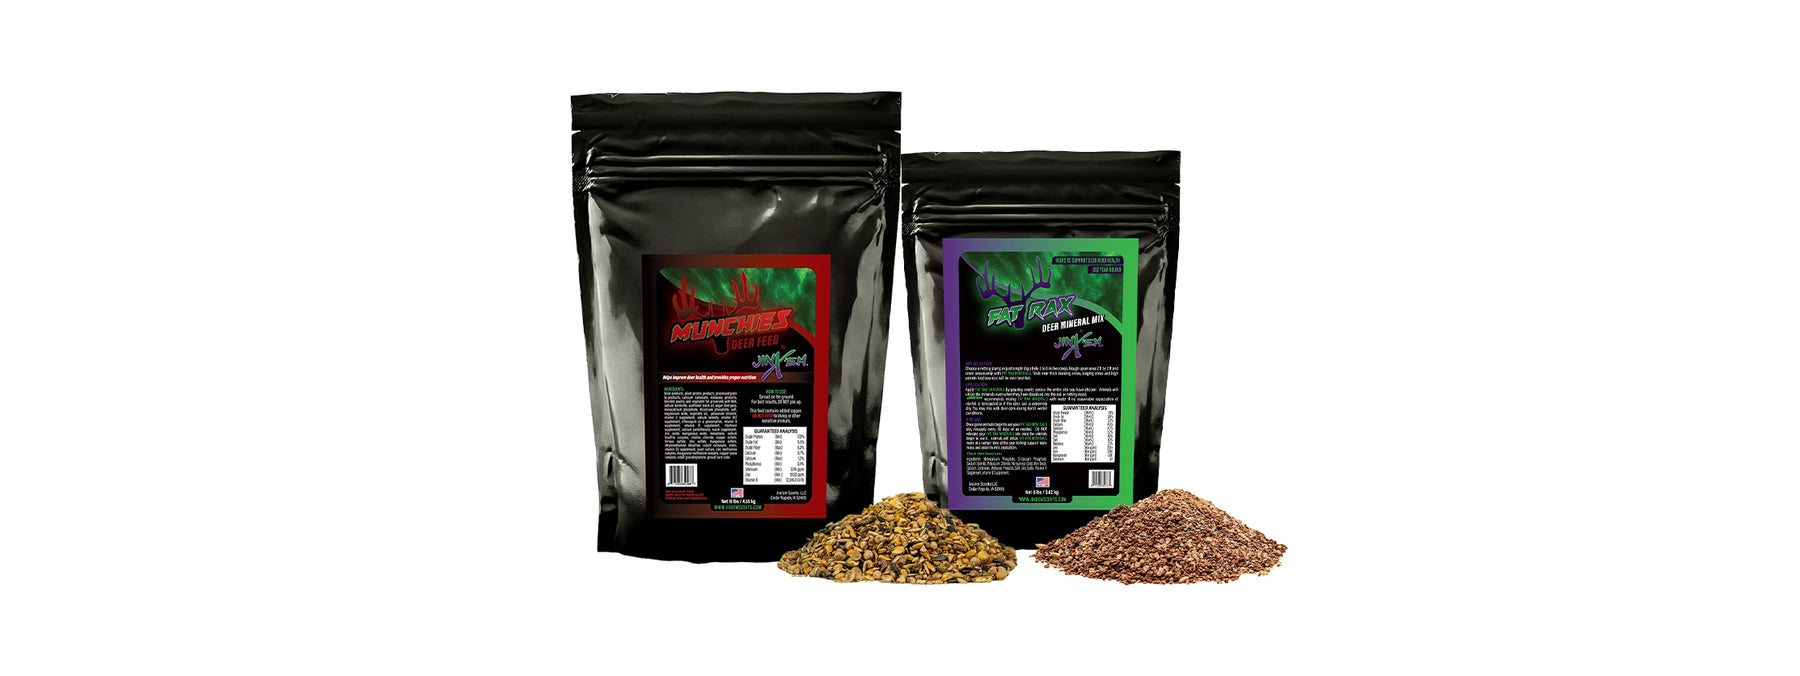 Mixing Fat Rax Mineral and Munchies Deer Feed for Irresistible Deer Attraction